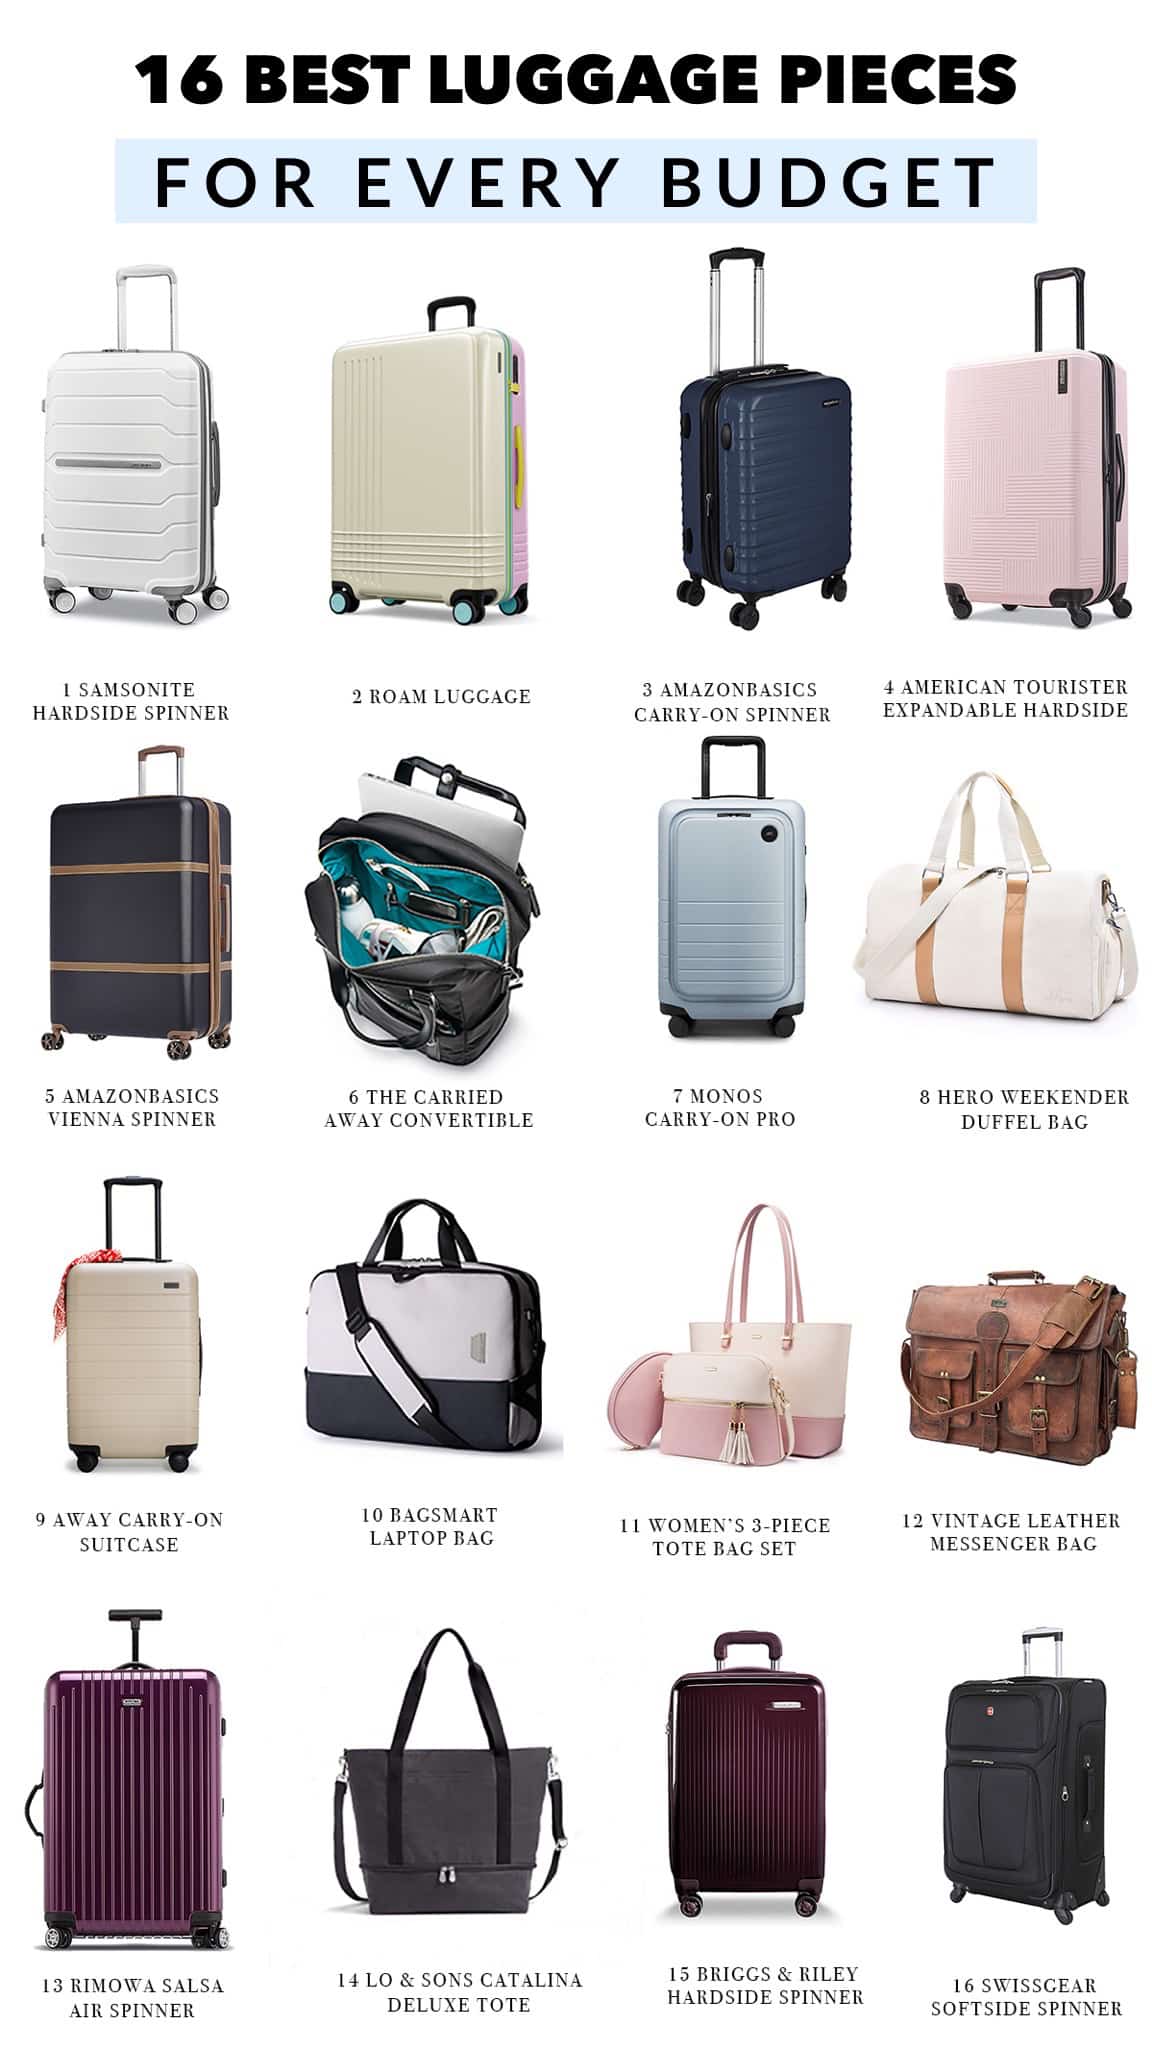 16 Best Luggage Pieces for Every Budget